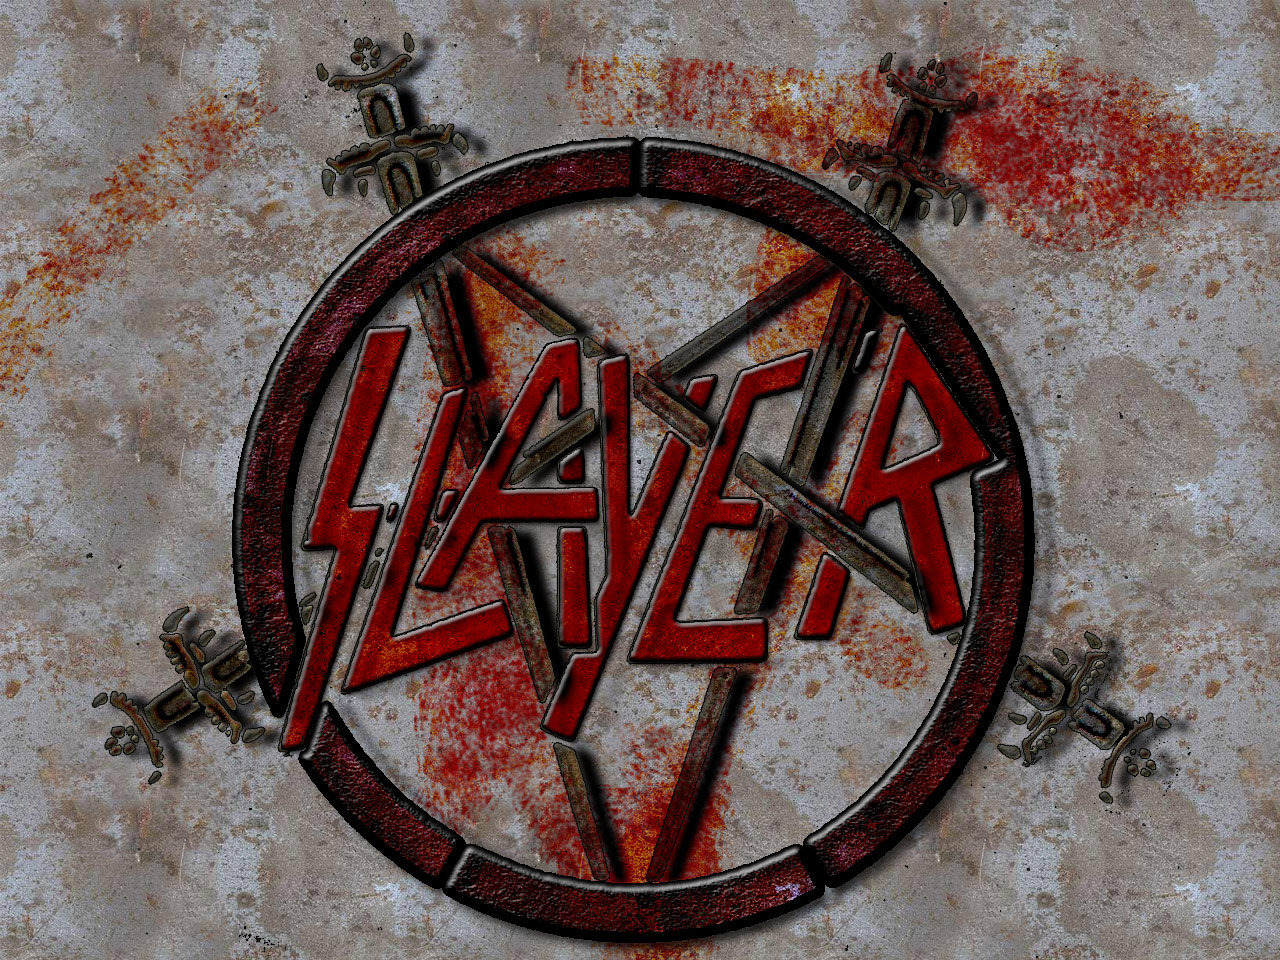 Slayer Wallpaper by smops on